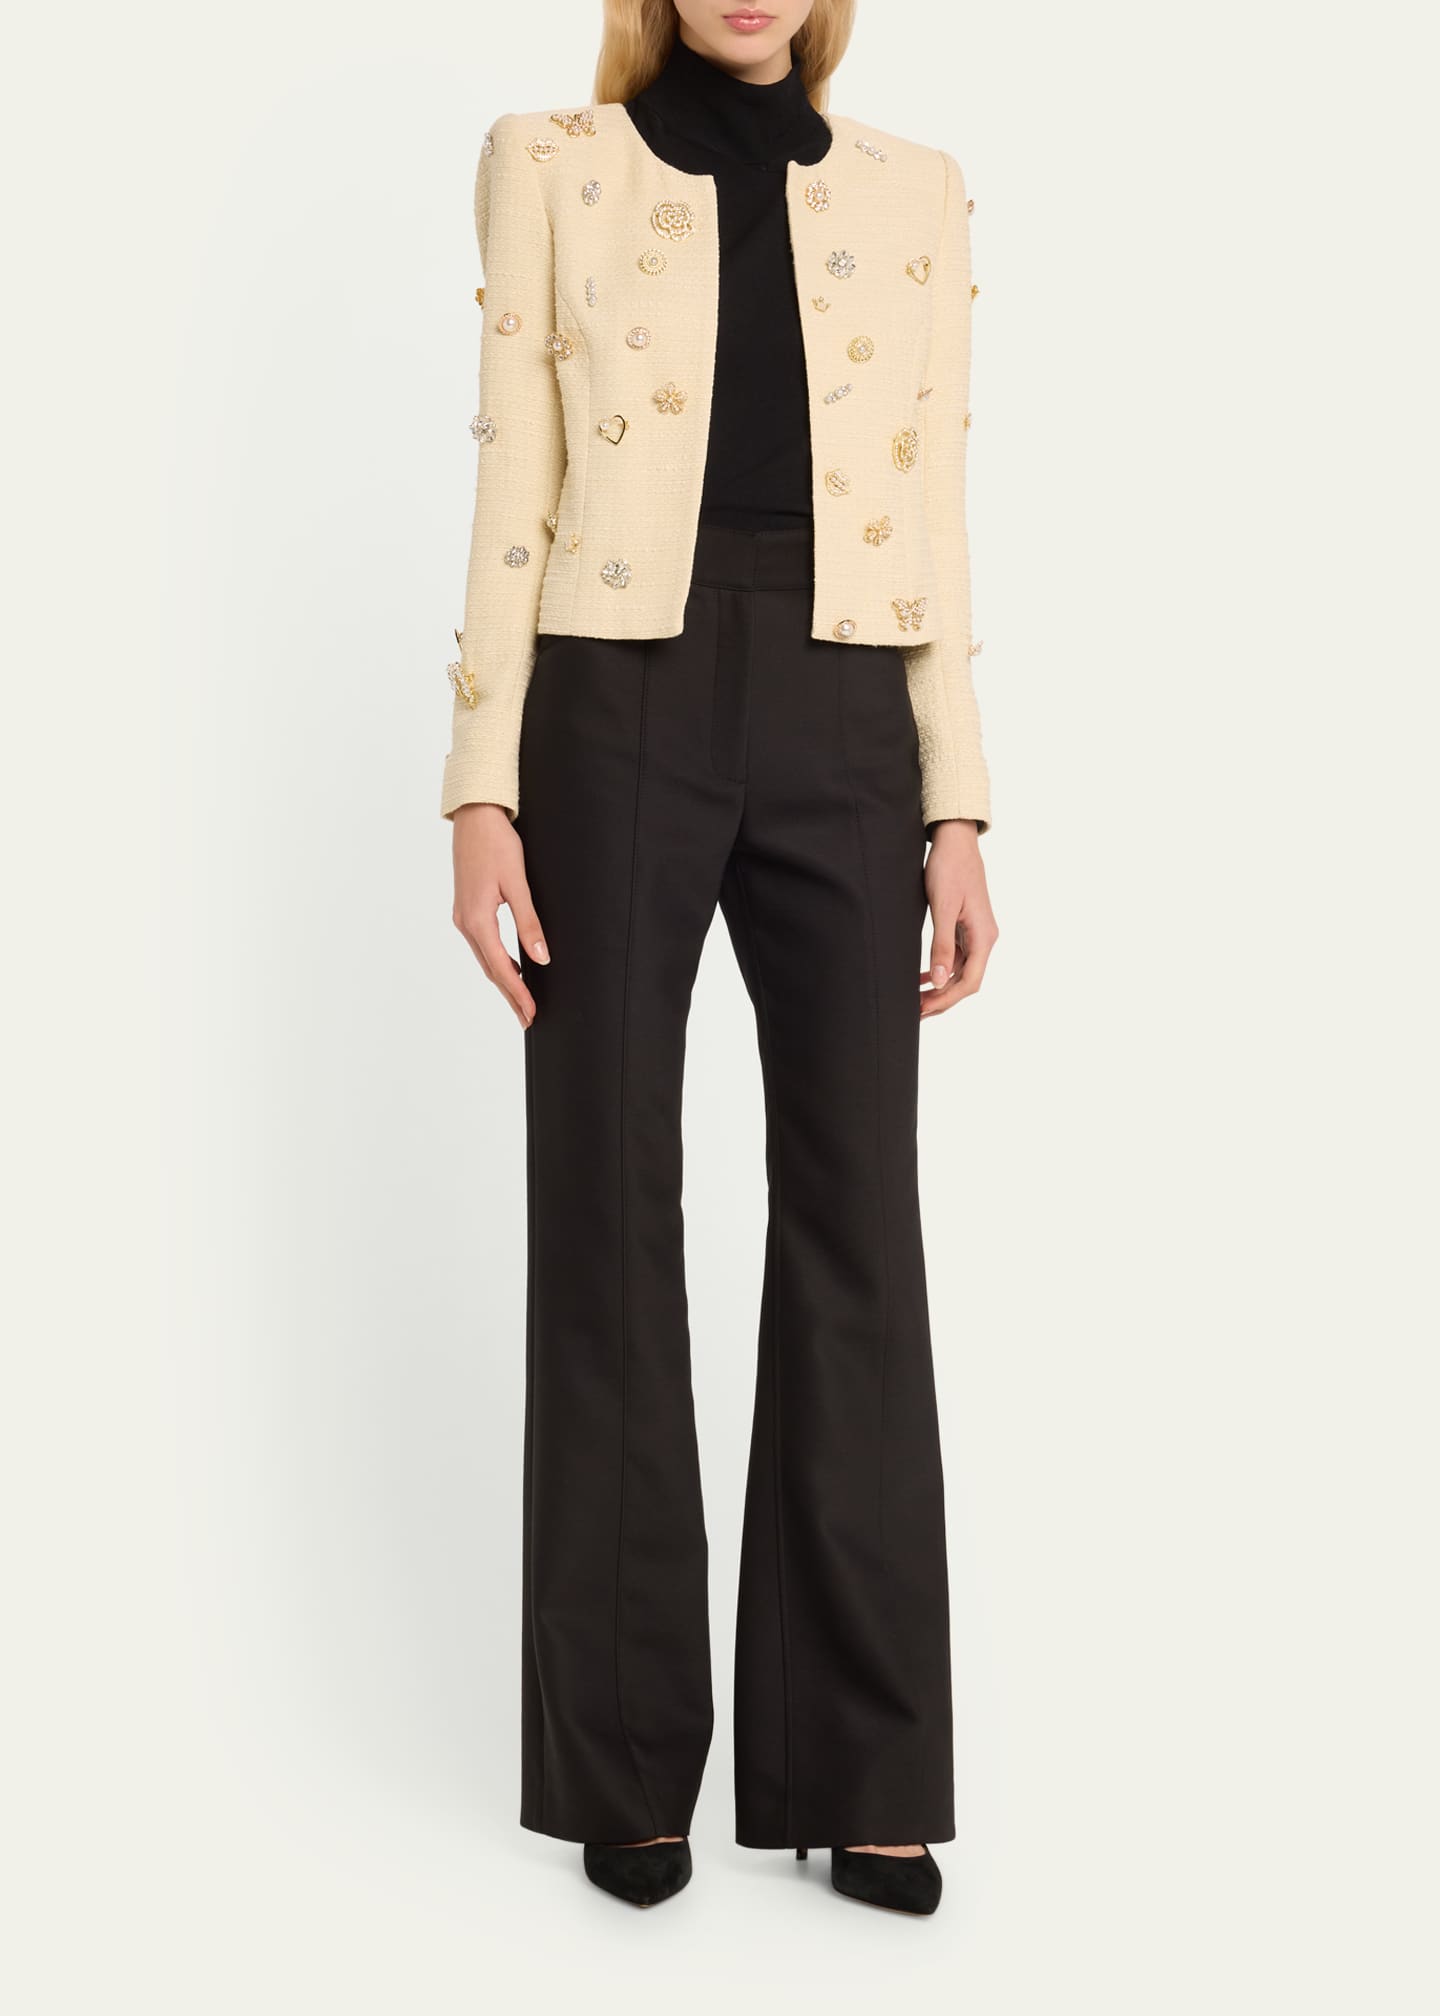 L'Agence Taylor Tweed Jacket with Broaches - Bergdorf Goodman